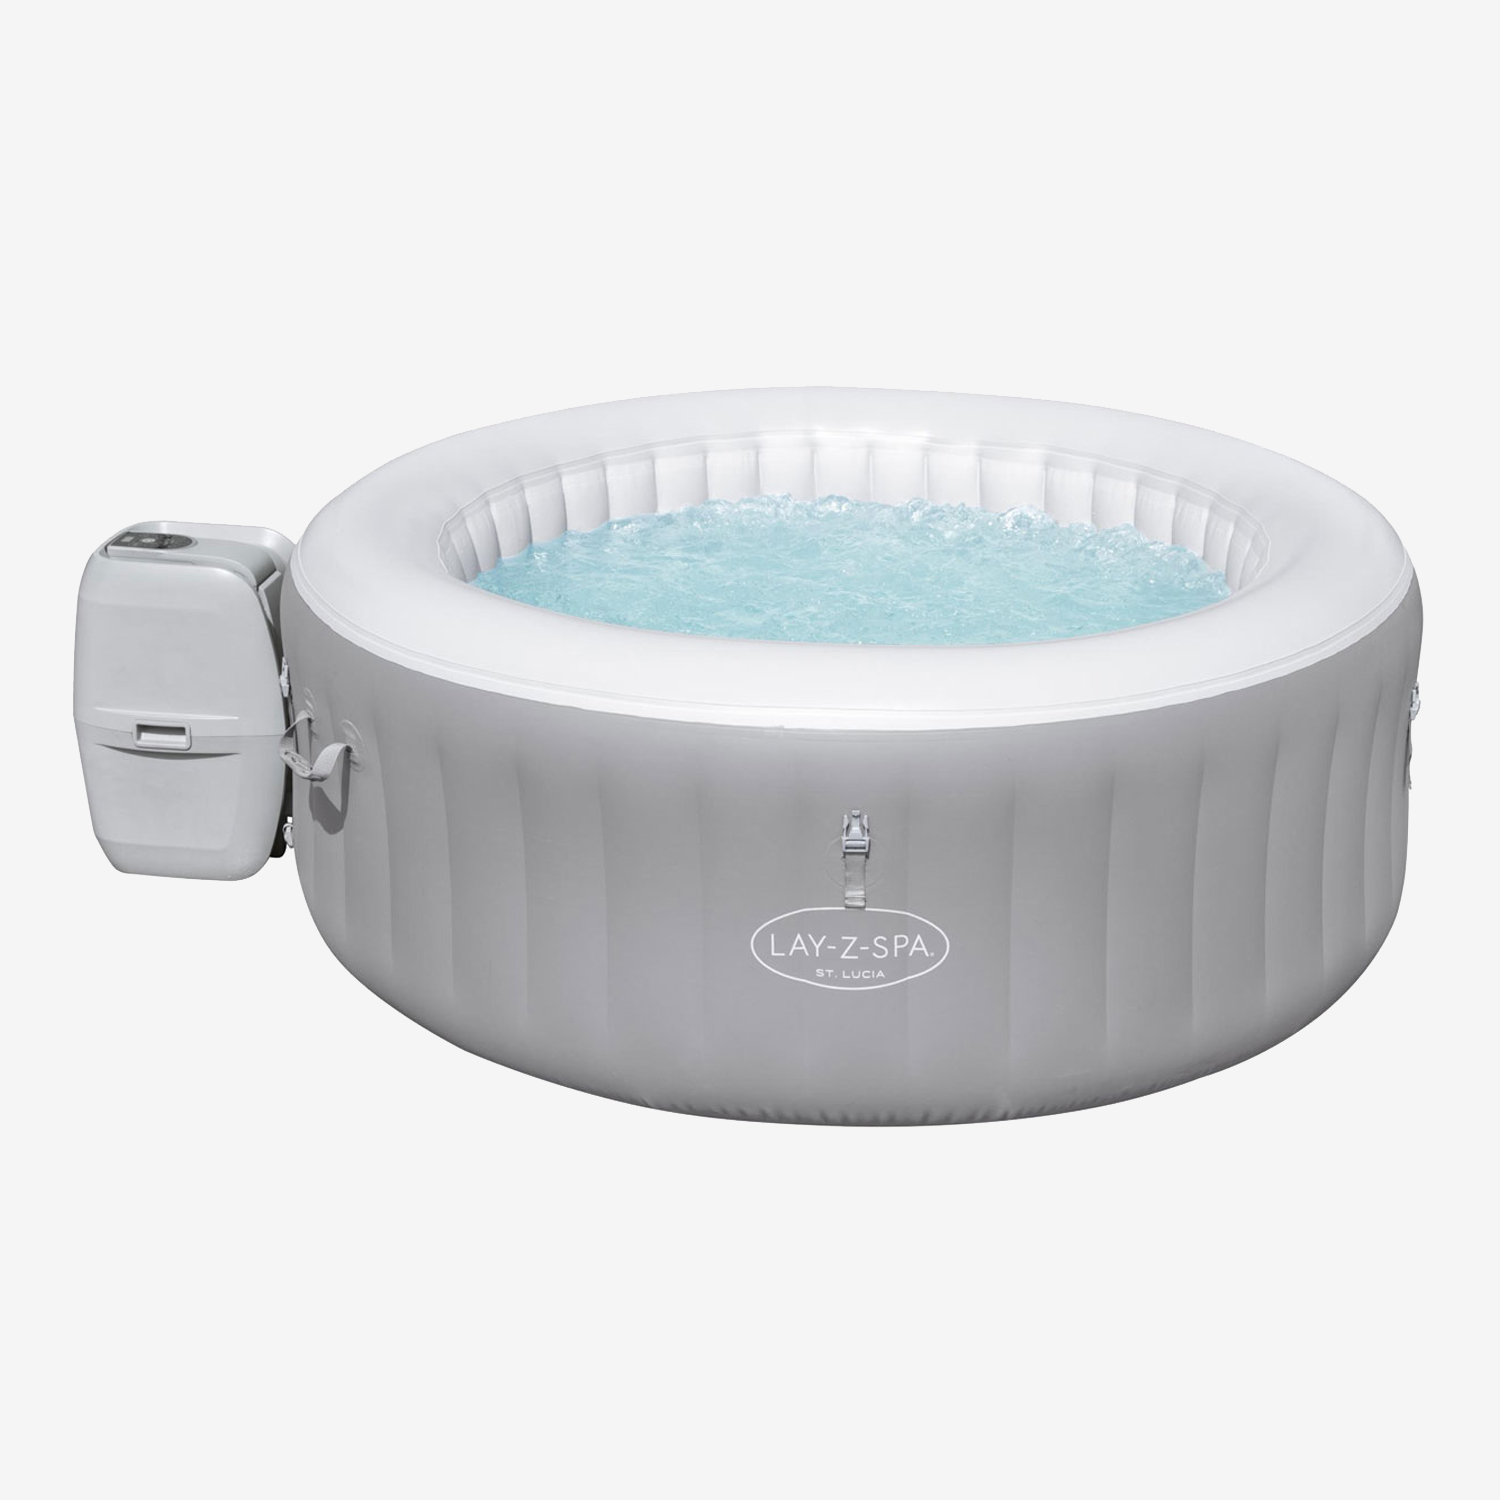 Spa Hinchable Bestway Lay-z-spa St Lucia 3 Personas - gris - 